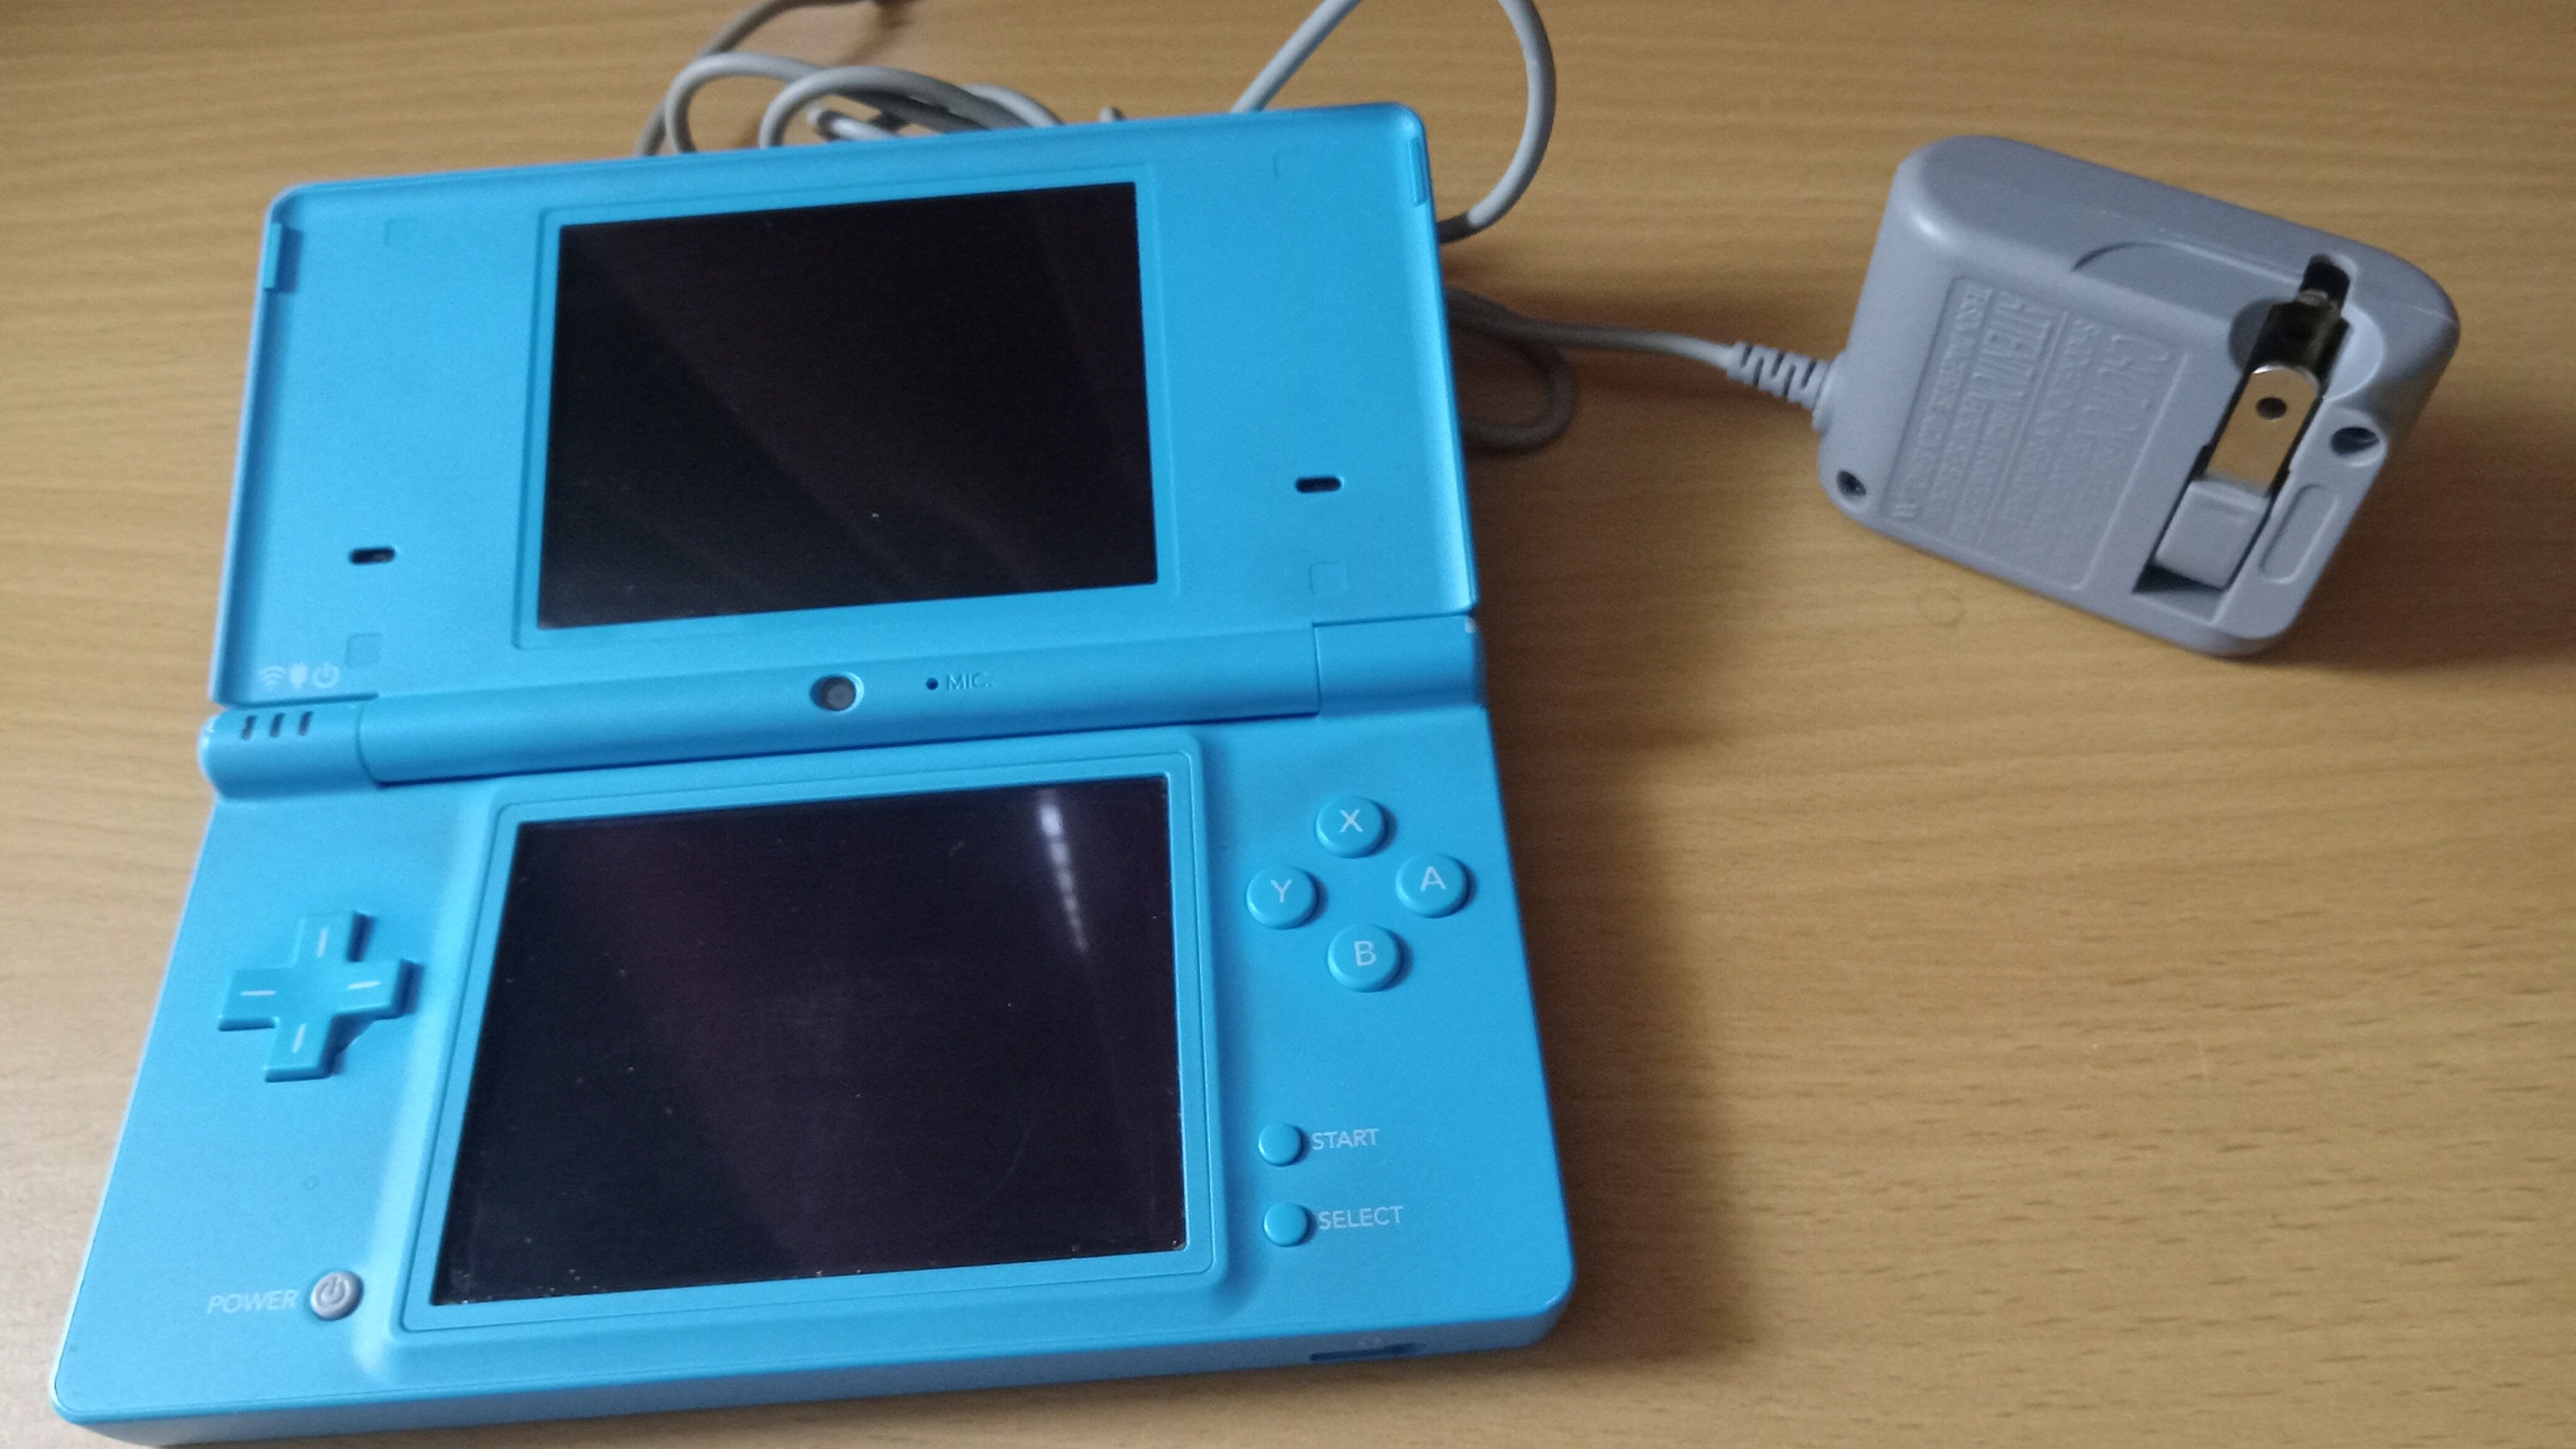 Nintendo DSi Light Blue Handheld Console Game System with charger and case